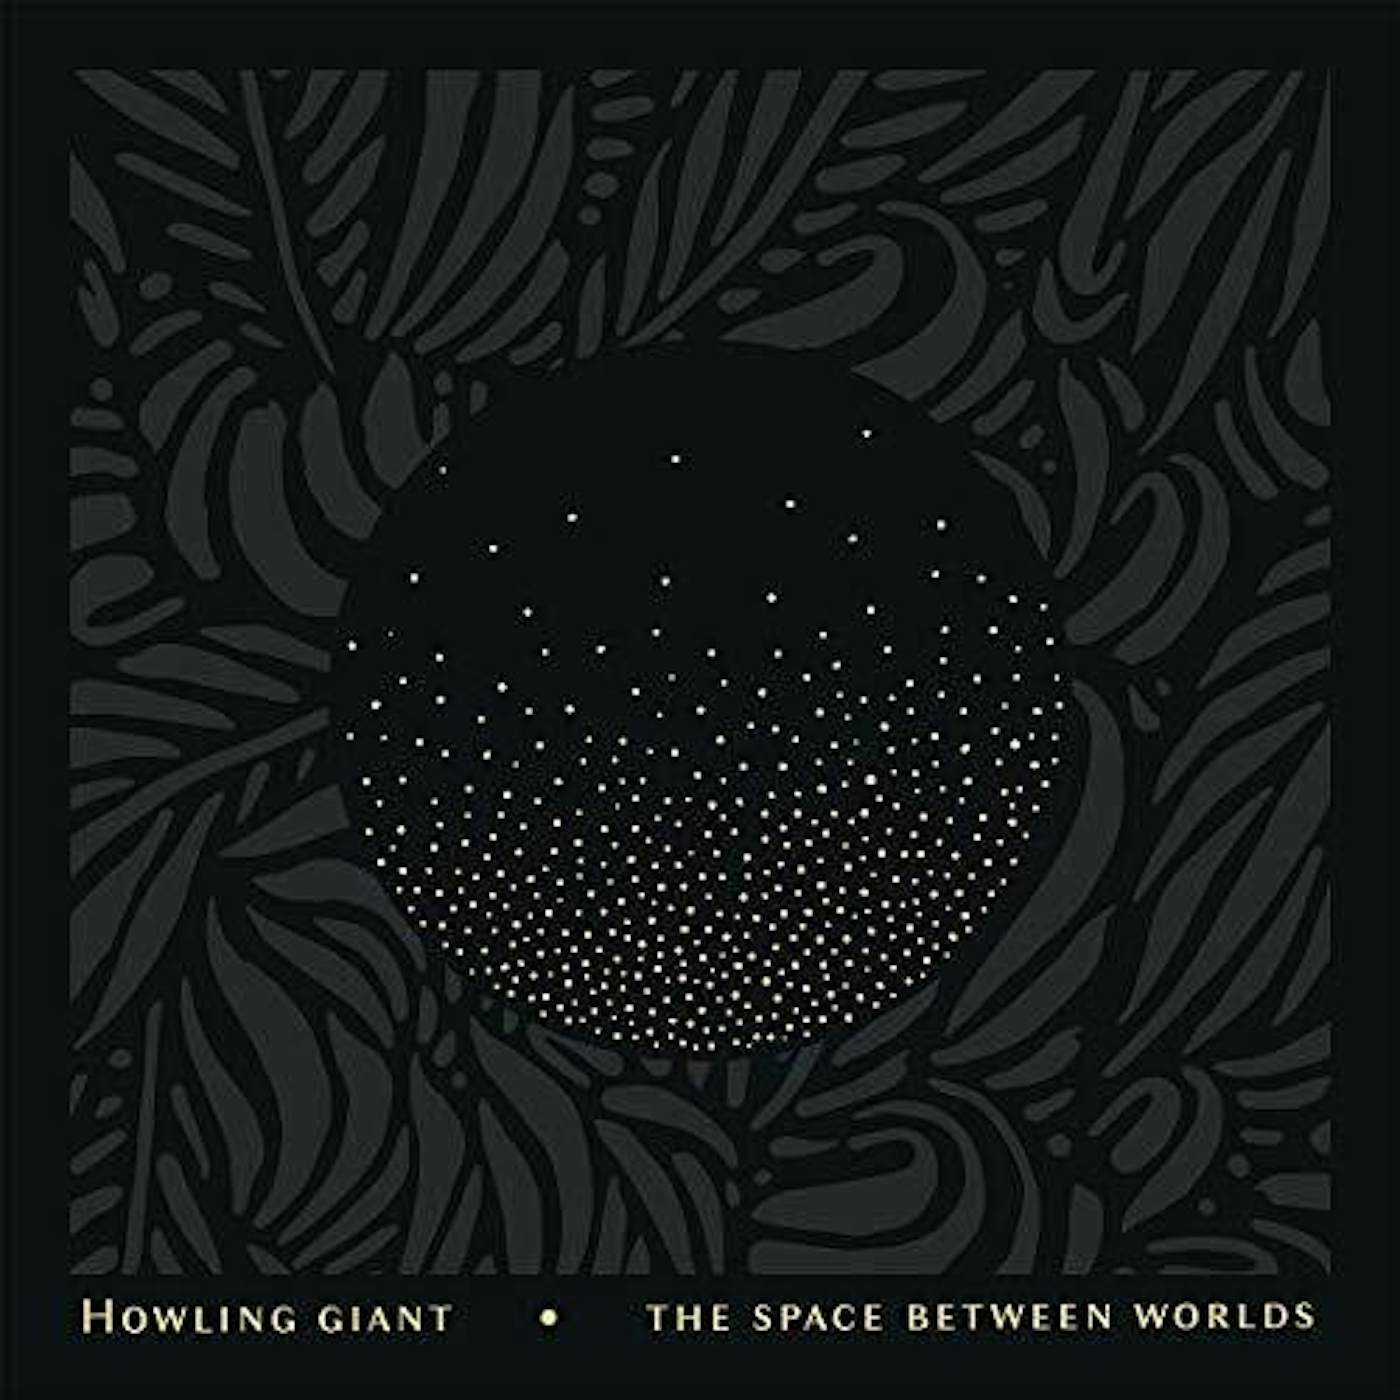 Howling Giant SPACE BETWEEN WORLDS Vinyl Record